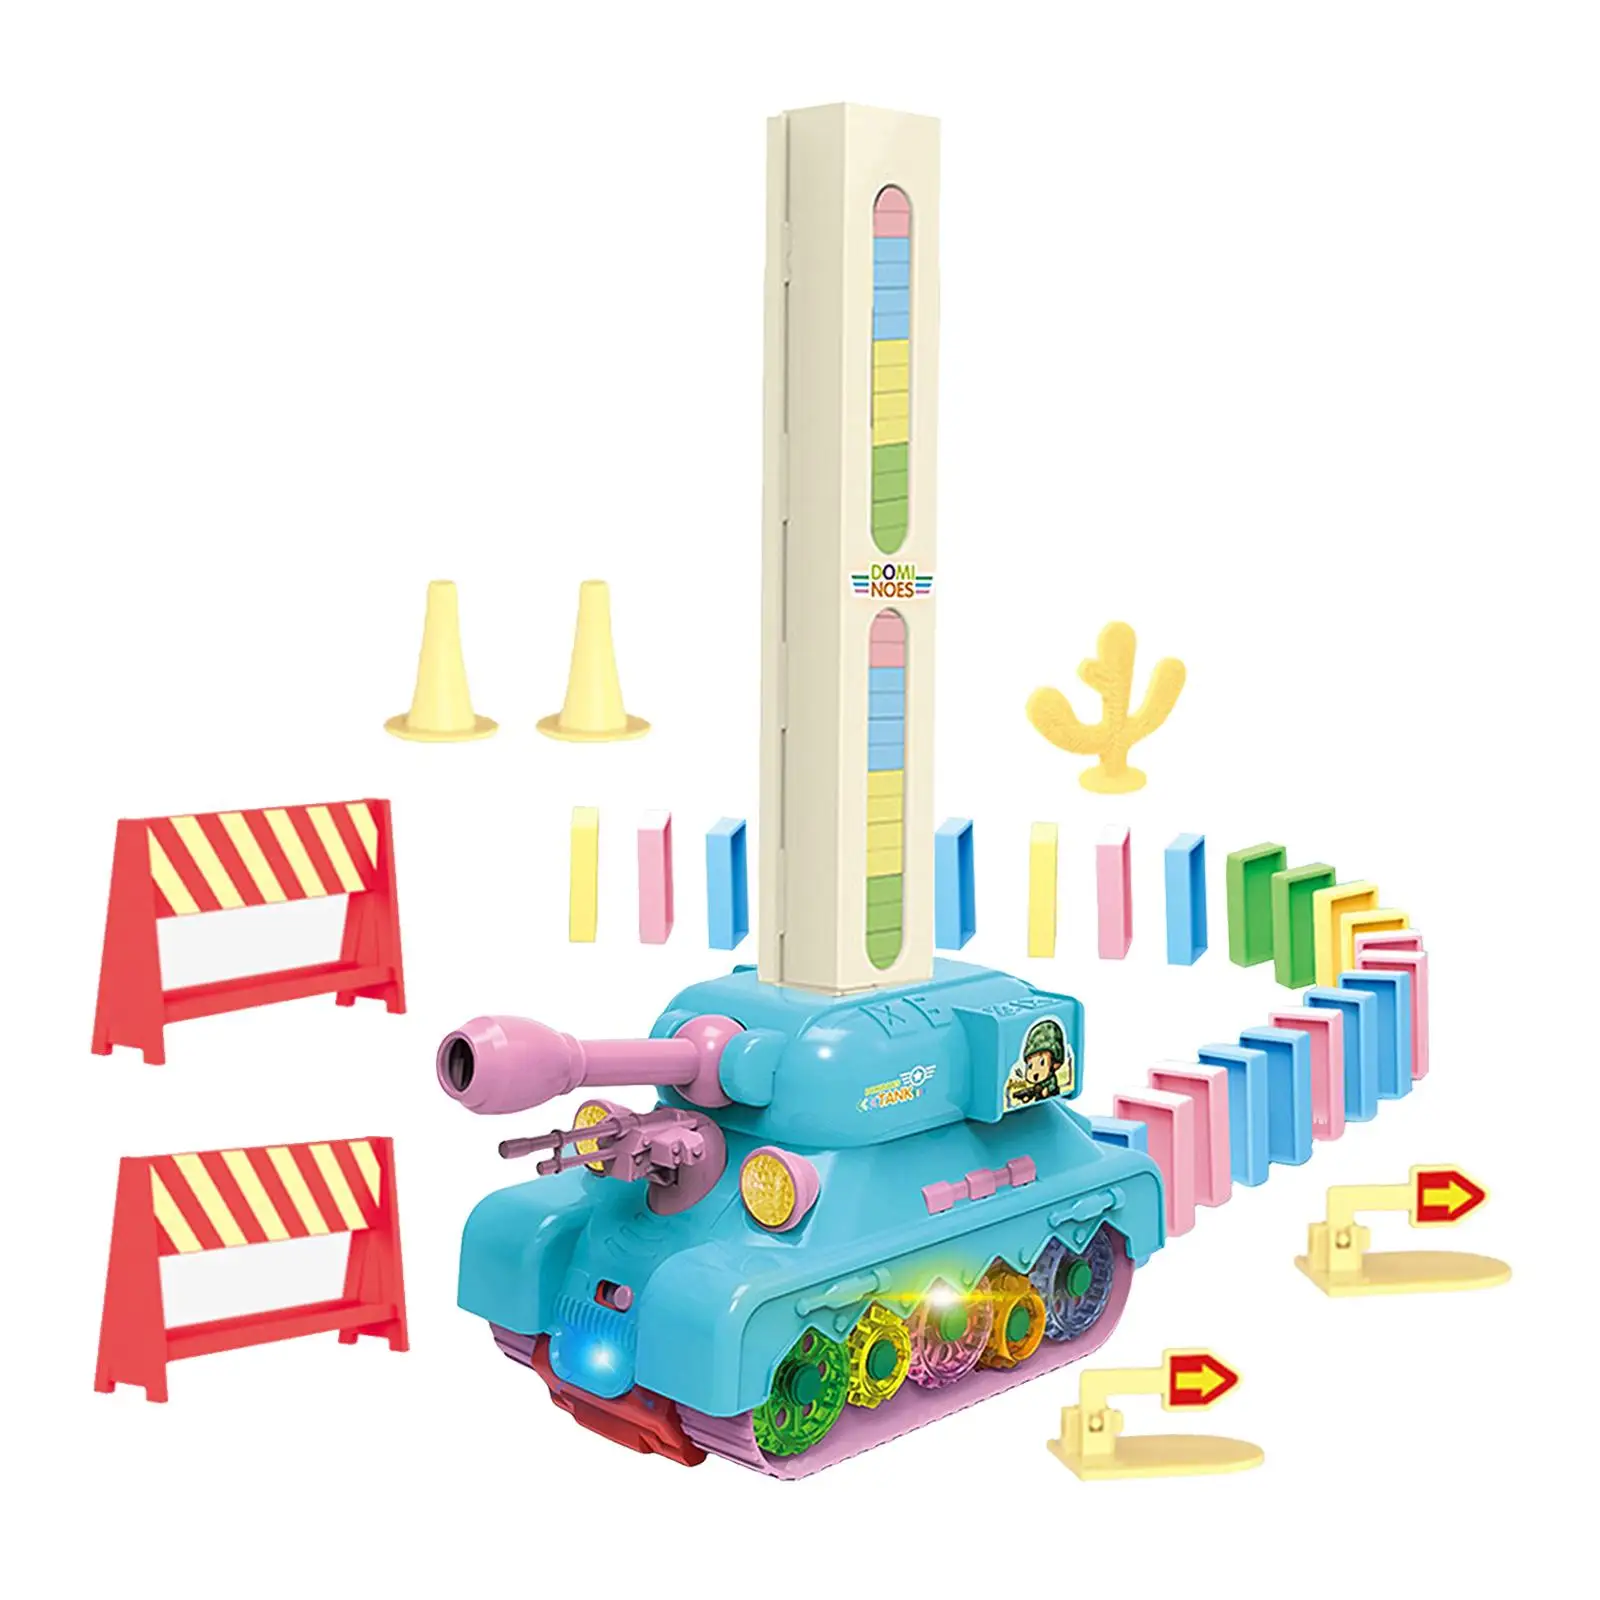 Creative Laying Toy Tank Set Educational Toys for Boys Kids Birthday Gifts